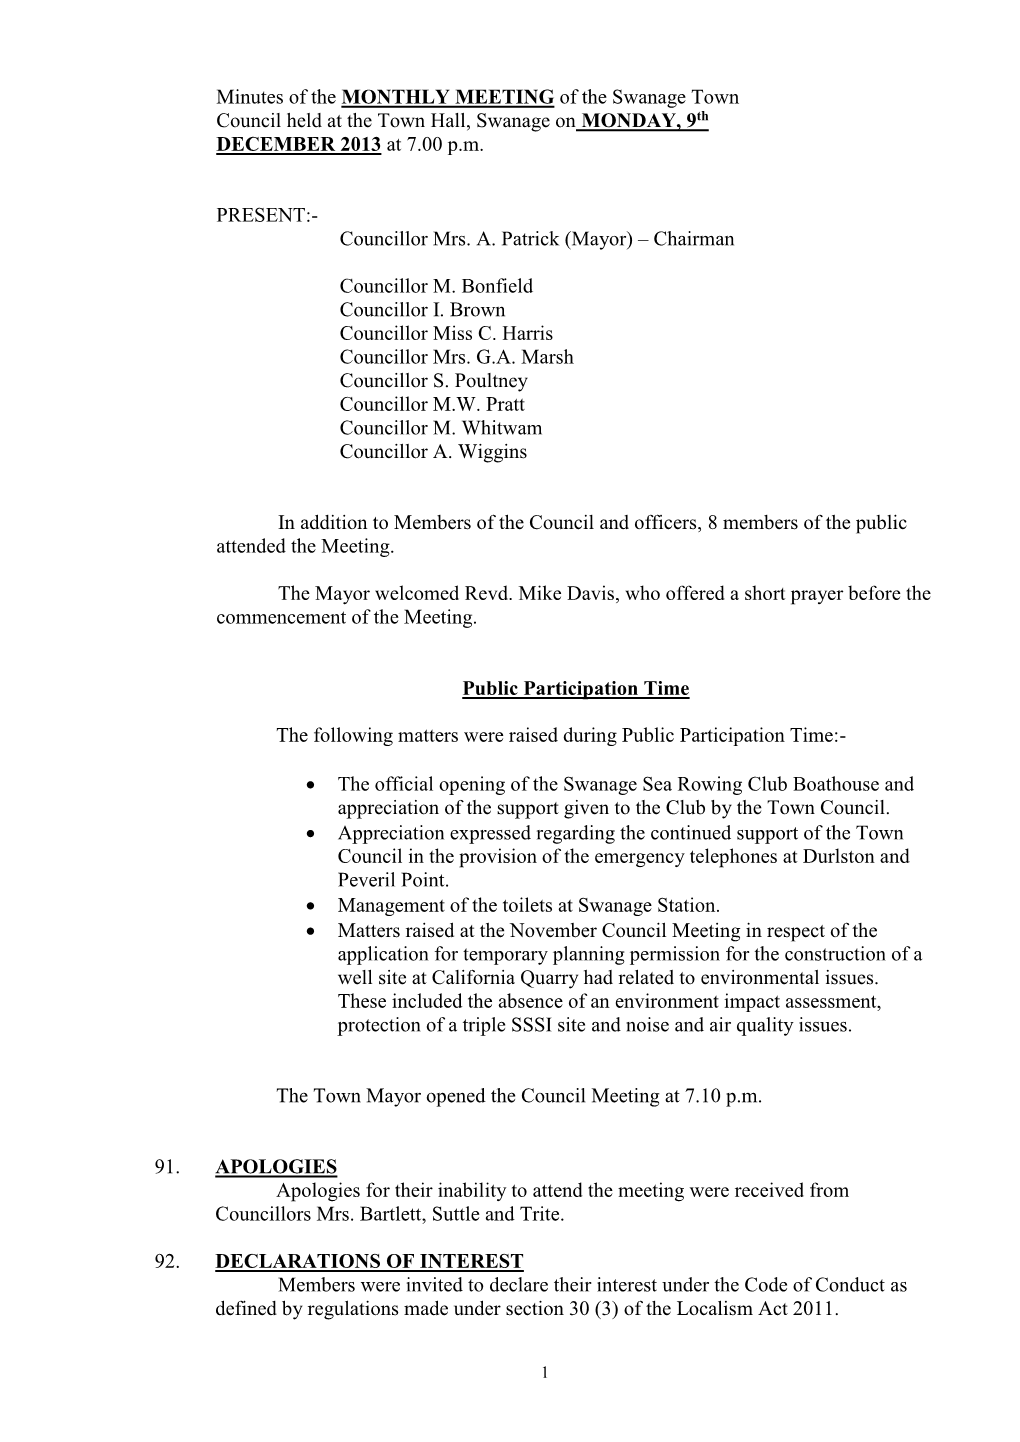 Minutes of the ANNUAL MEETING of the Swanage